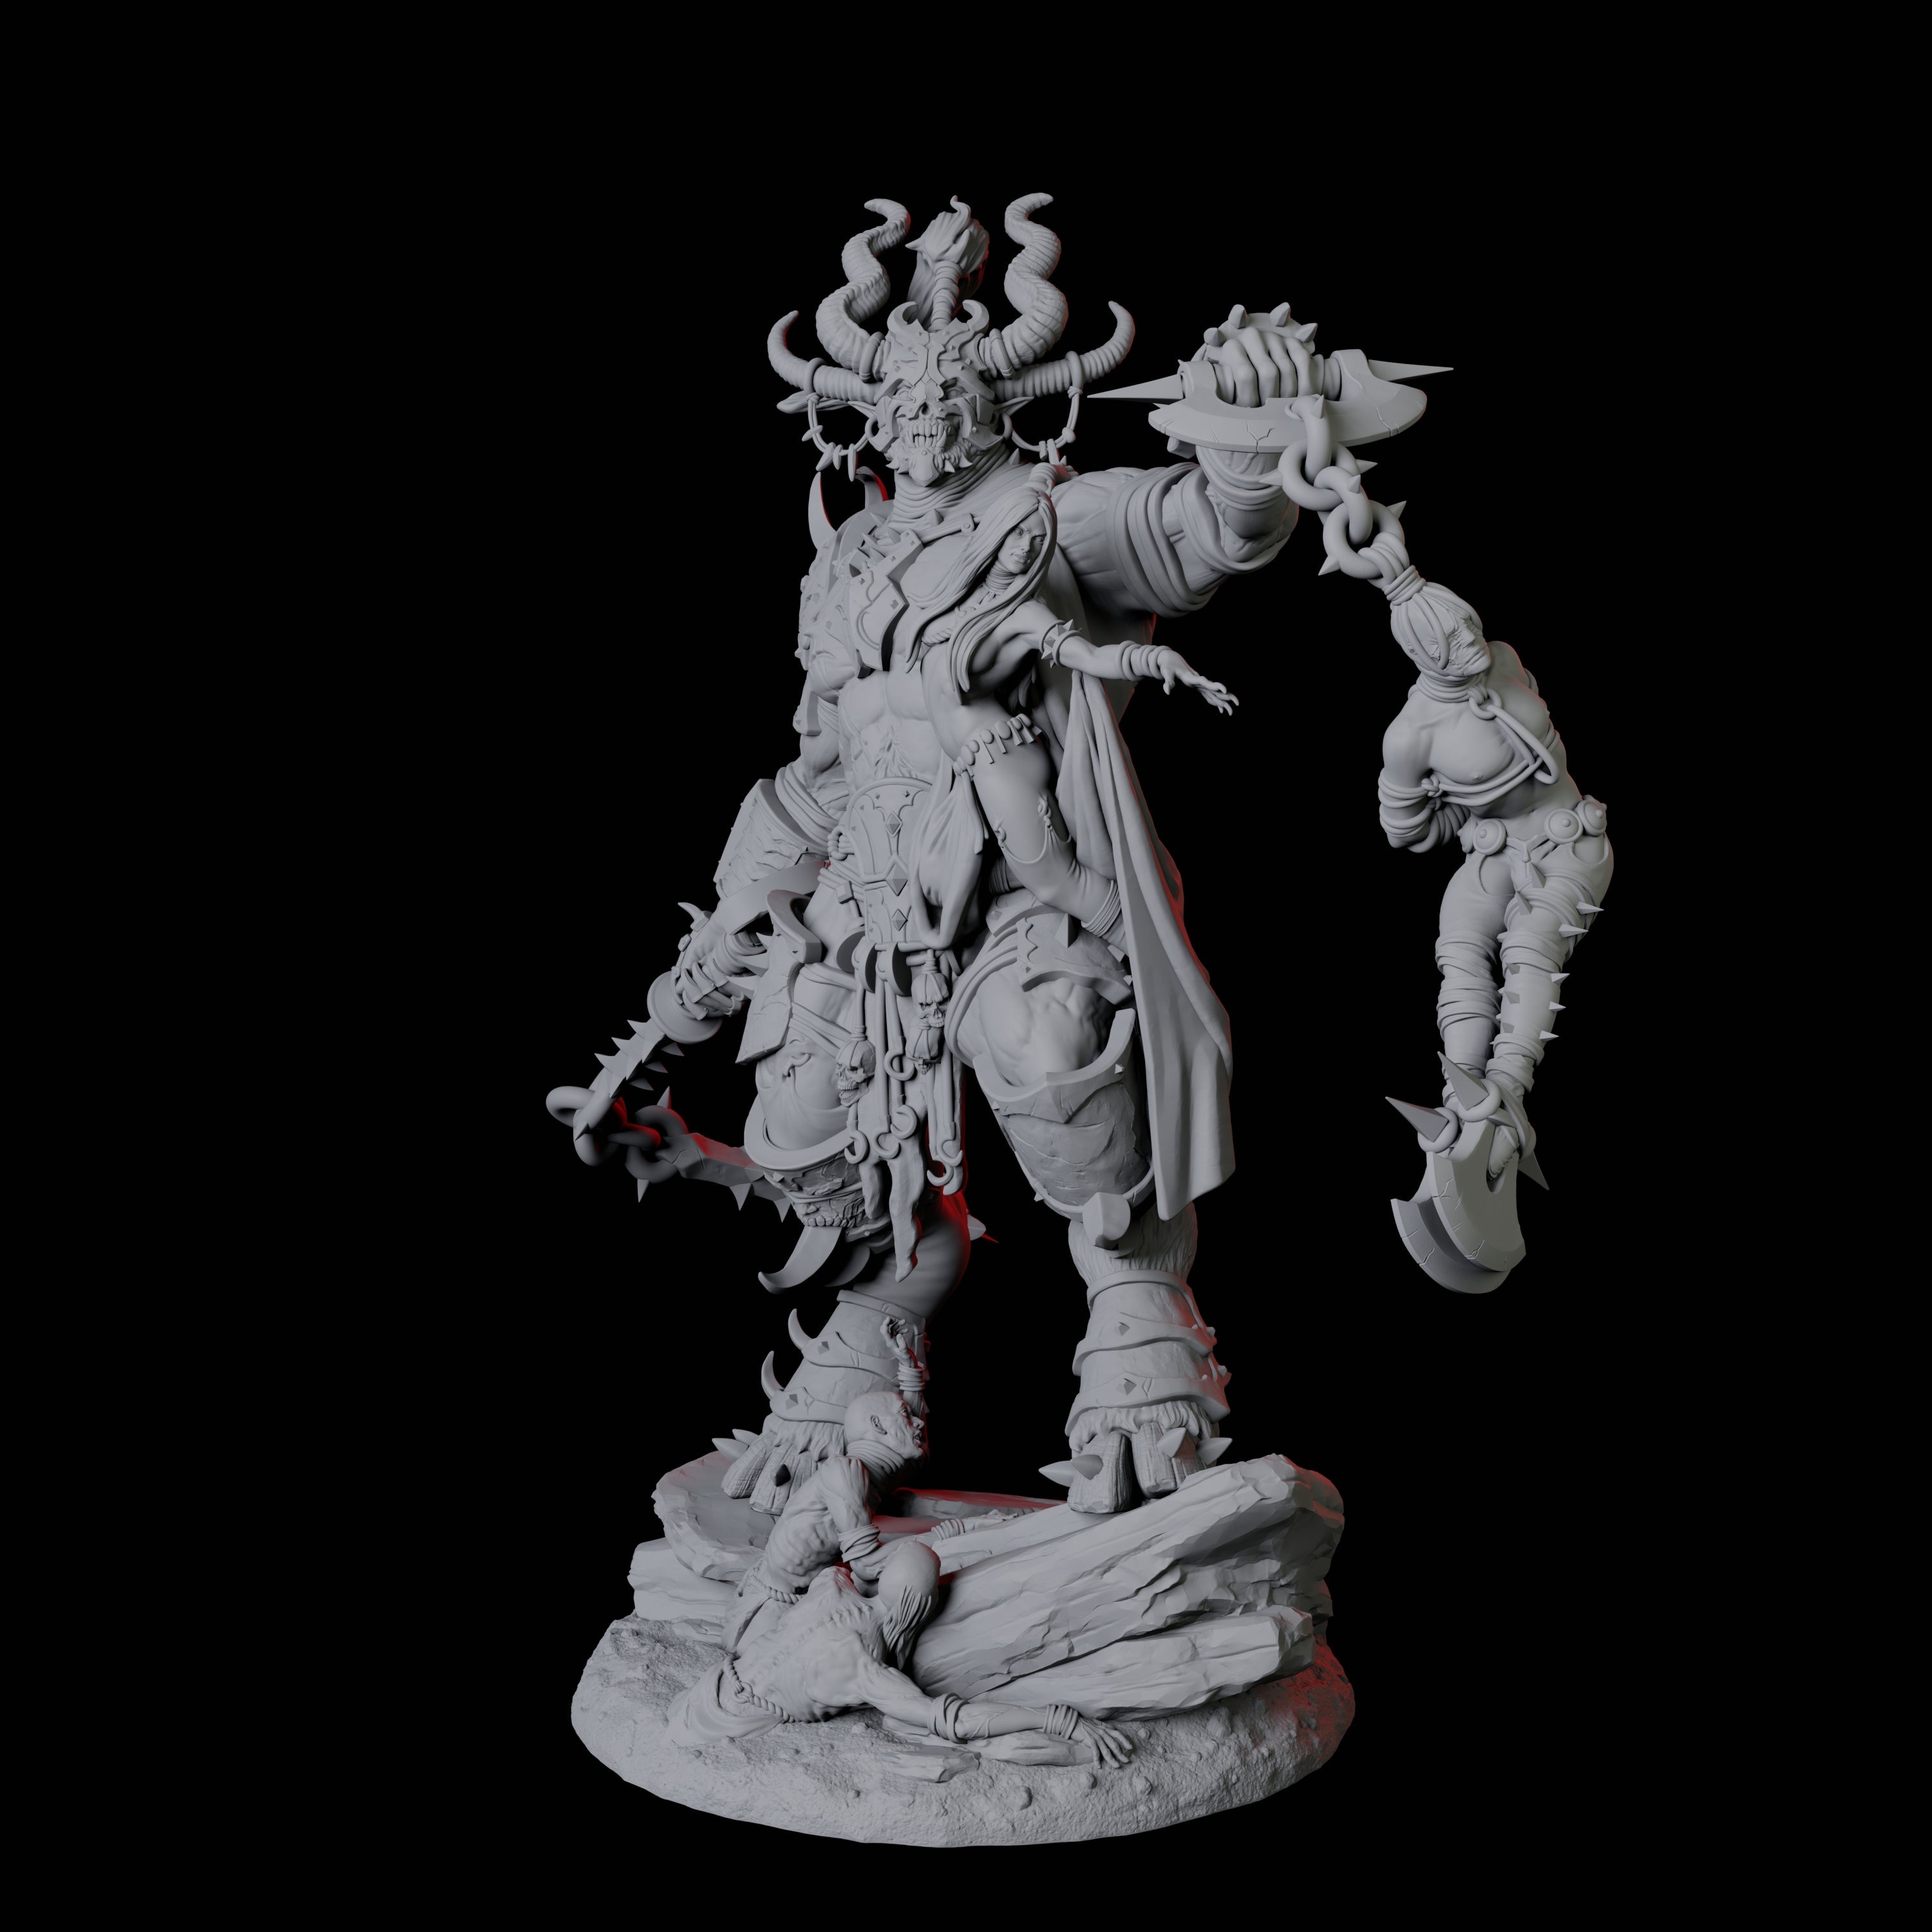 Seduced Bearded Devil Champion C Miniature for Dungeons and Dragons, Pathfinder or other TTRPGs